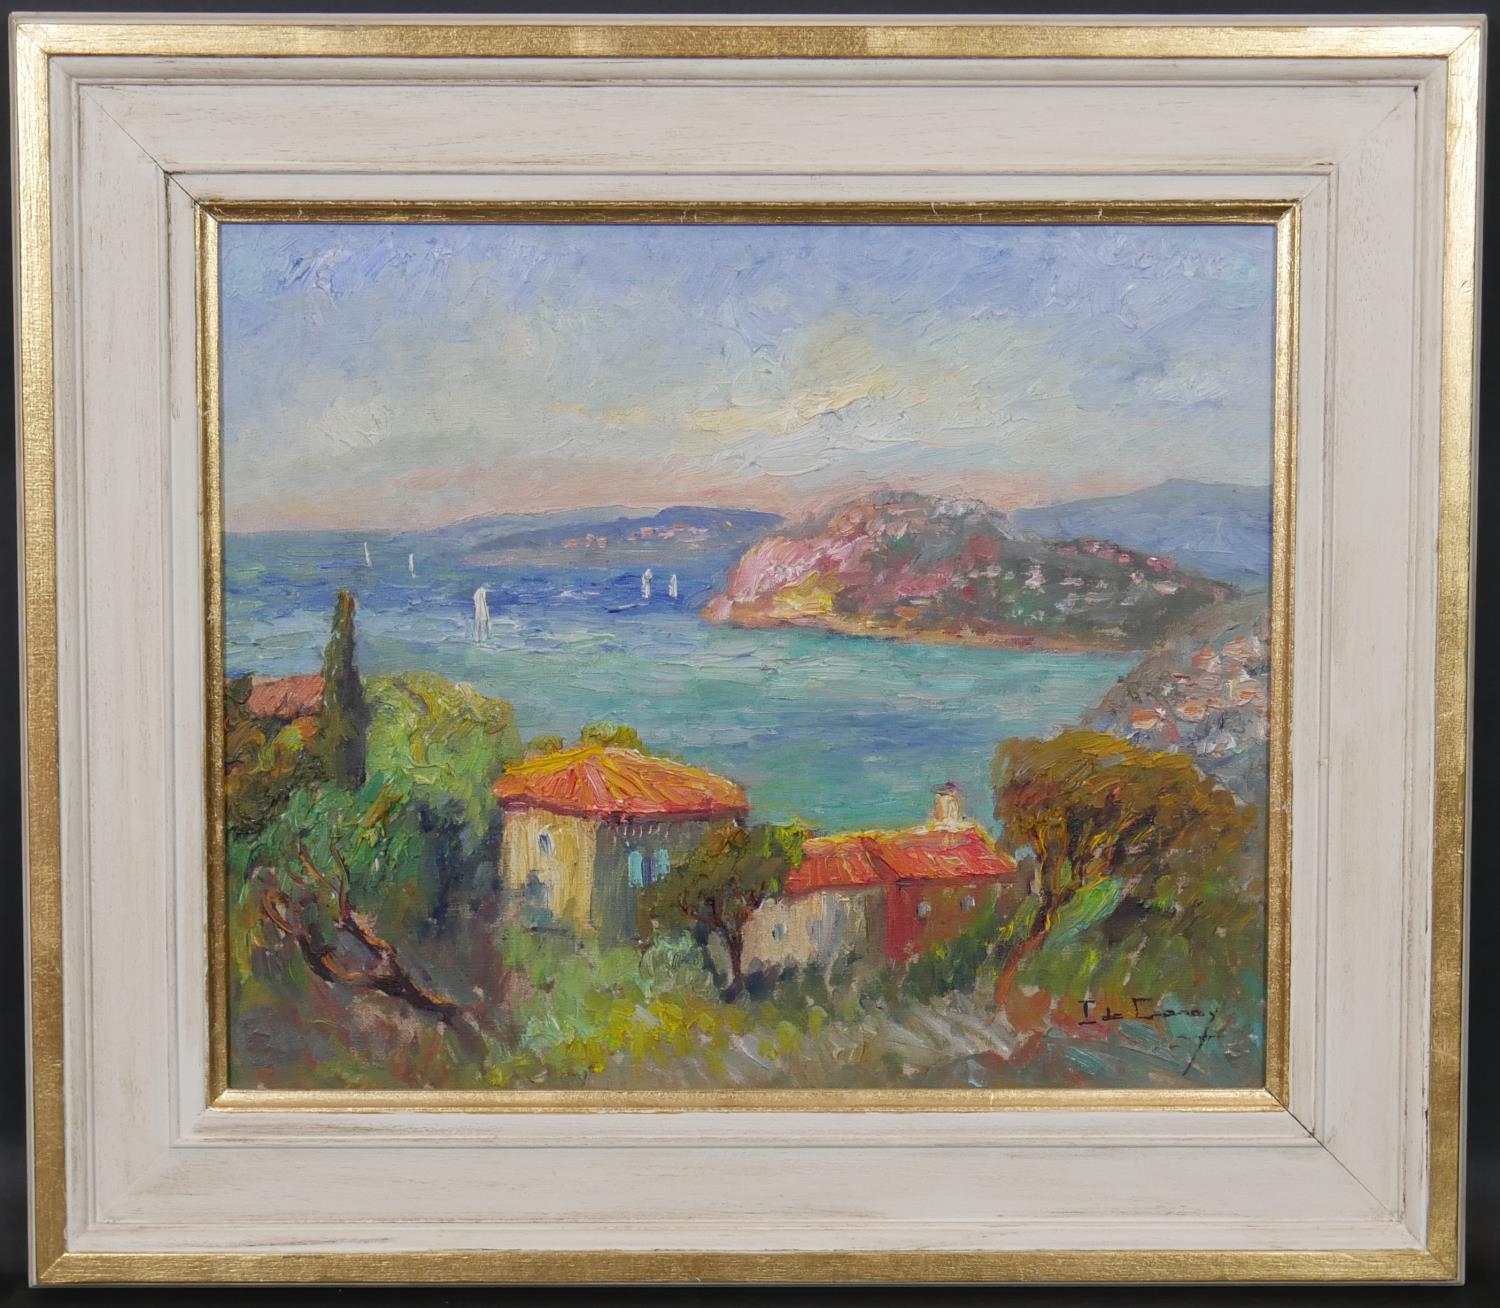 Isabelle de Ganay (B.1960), oil on canvas, Cote D'Azur bay scene with sailing ships, signed. H.54. - Image 2 of 5